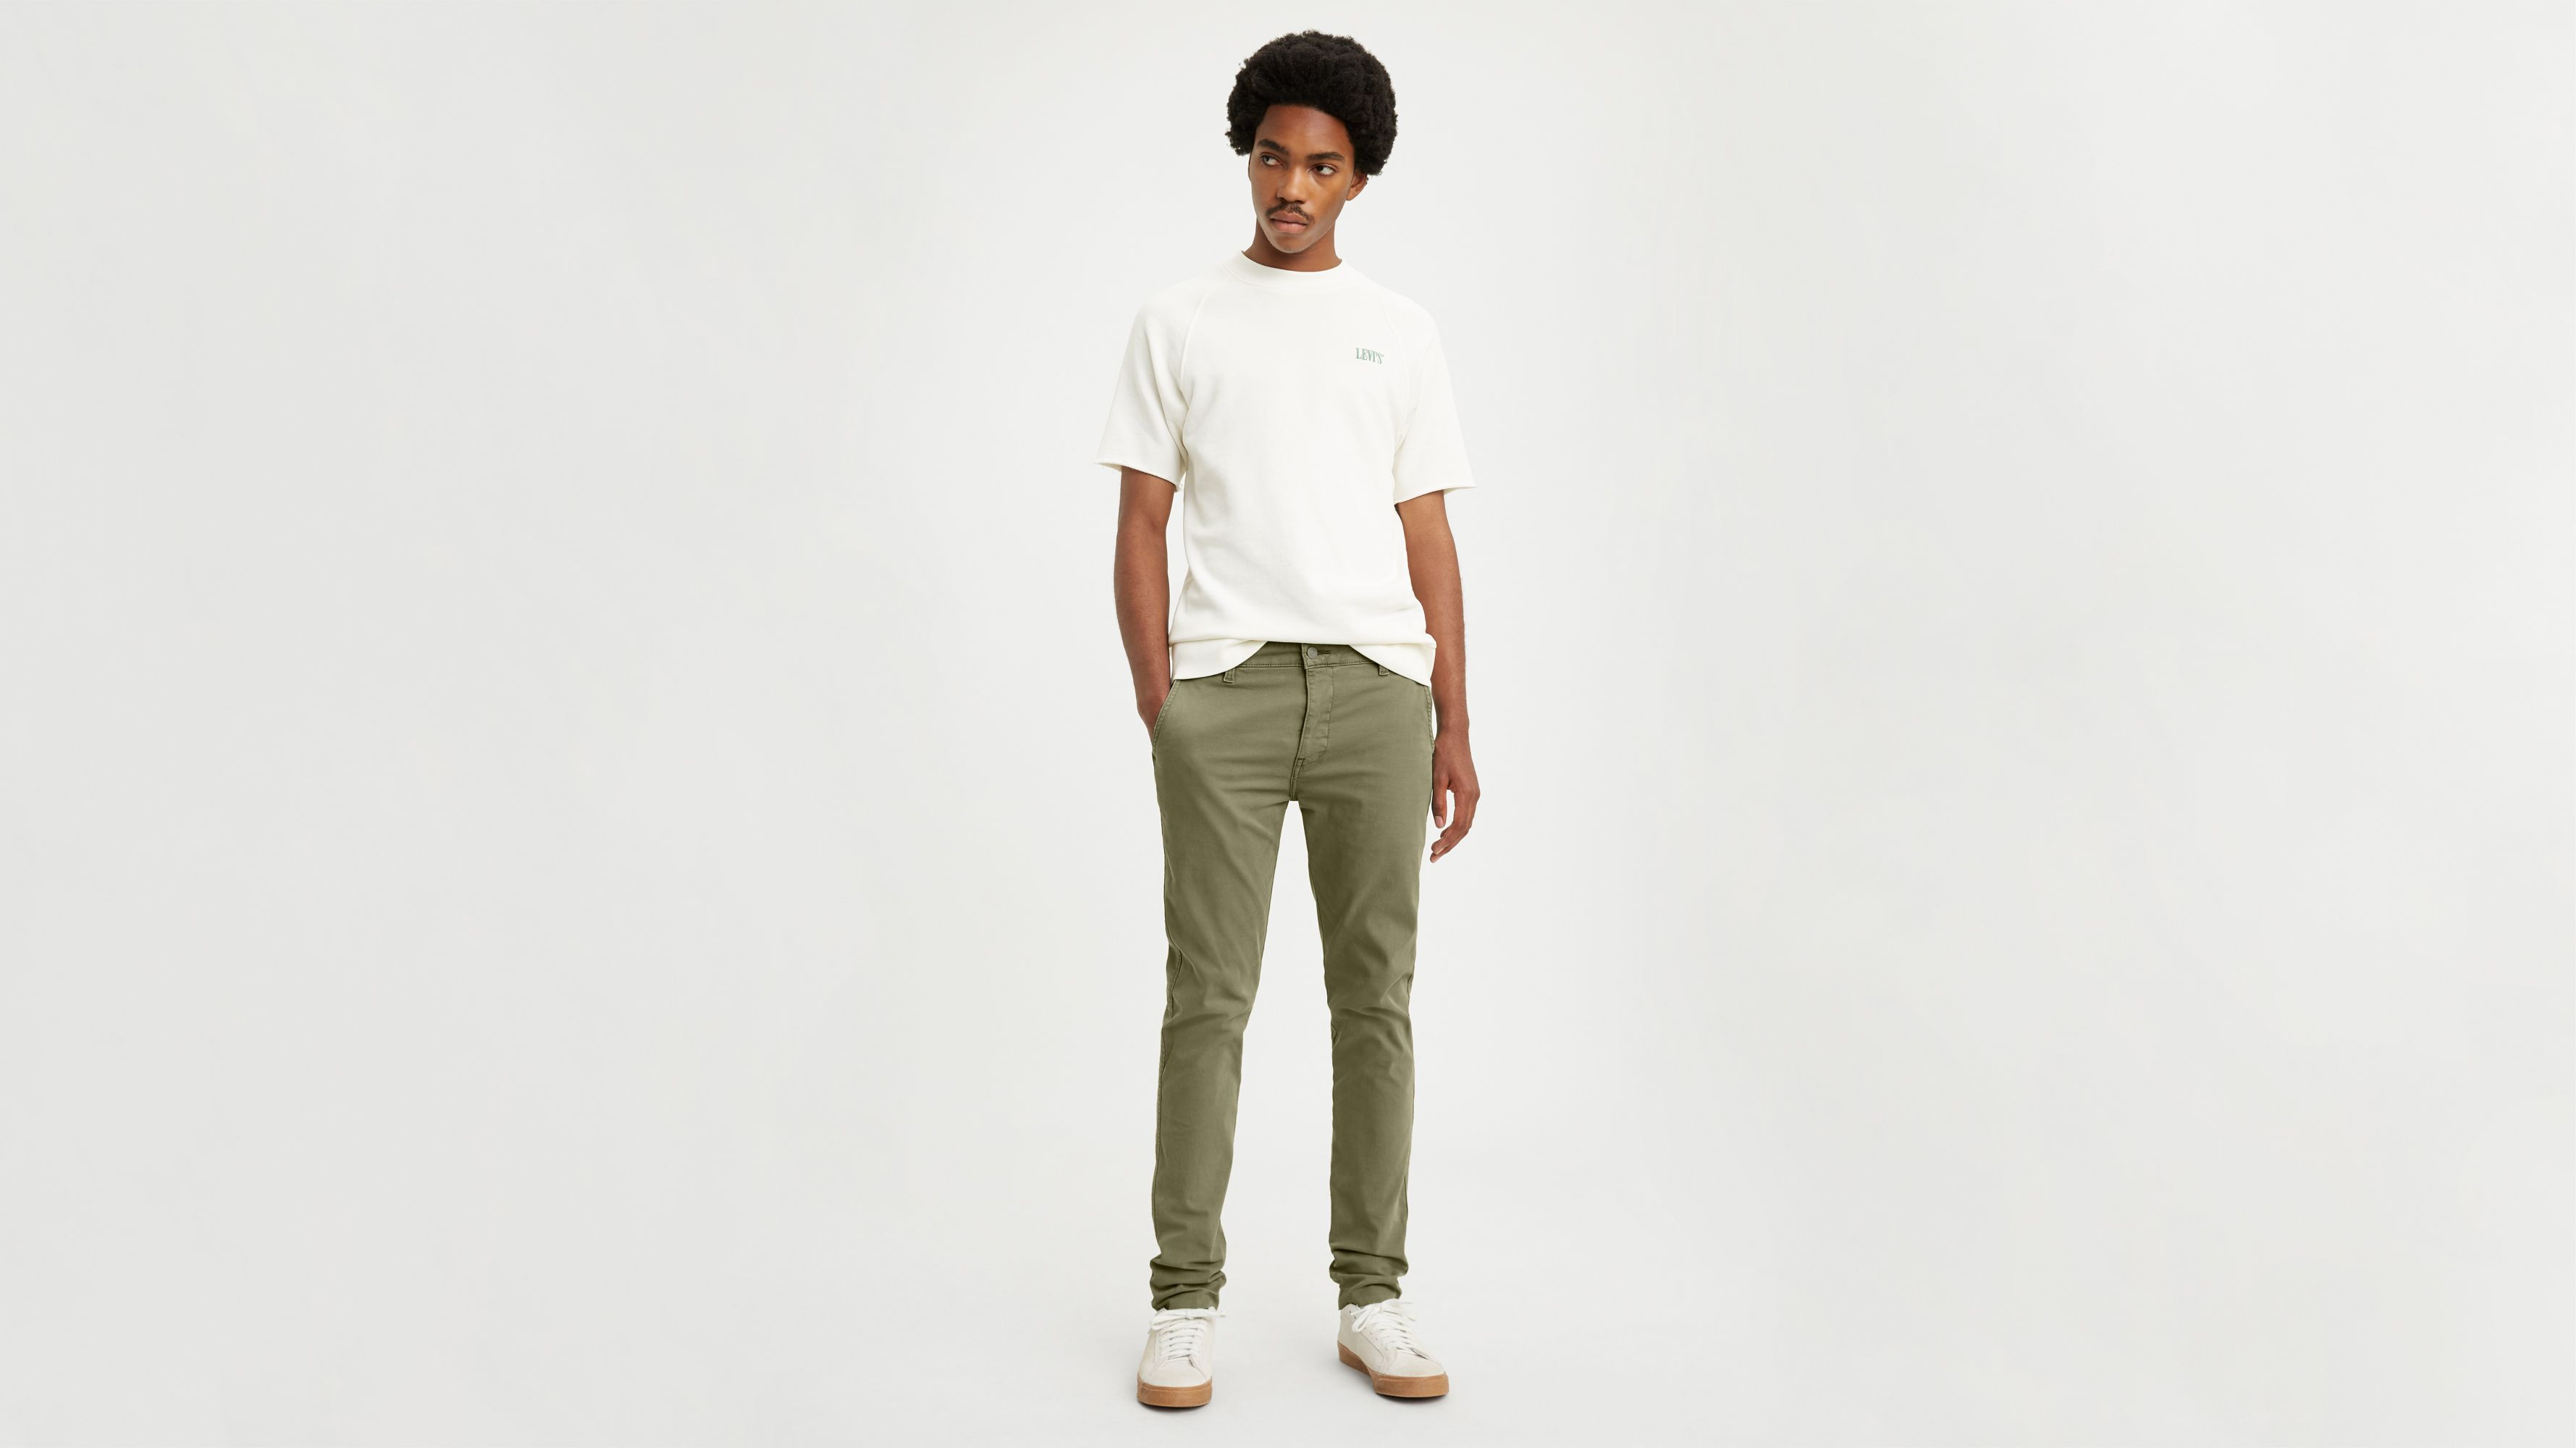 levis army green jeans